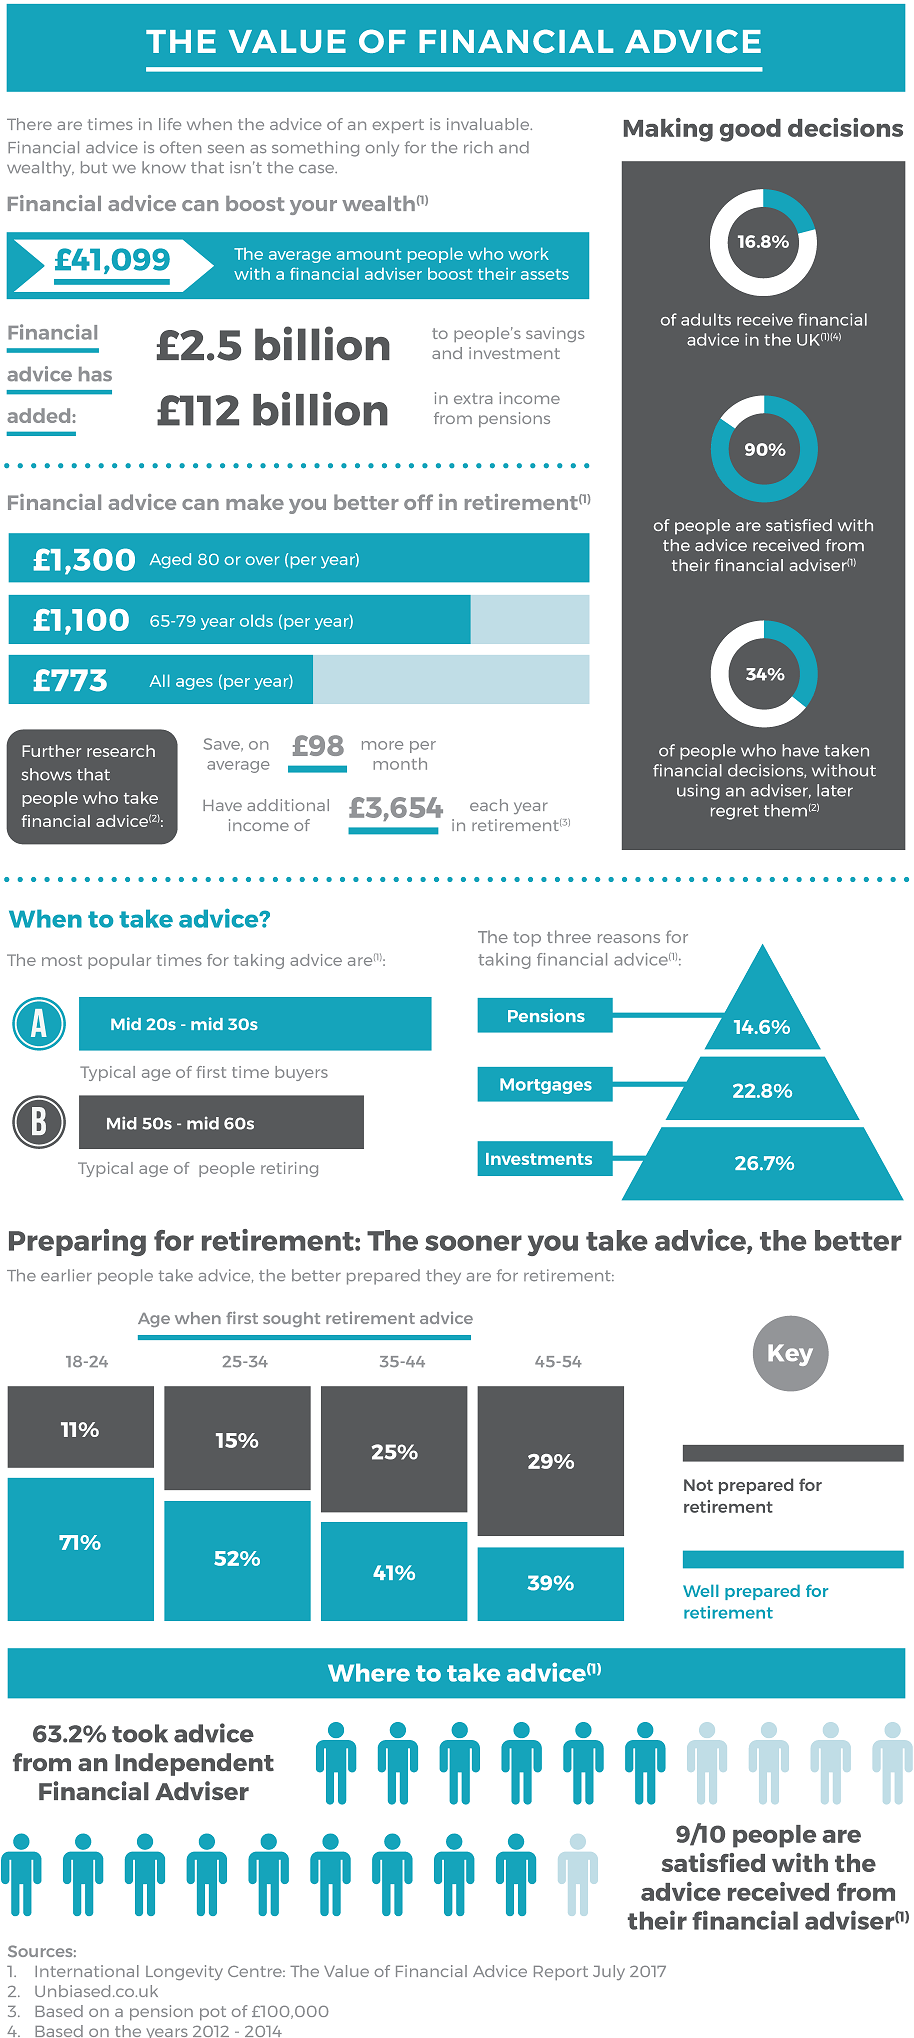 There are times in life when the advice of an expert is invaluable. Financial advice is often seem as something only for the rich and wealthy, but we know that isn't the case. Financial advice can boost your wealth. Financial advice can make you better off in retirement.